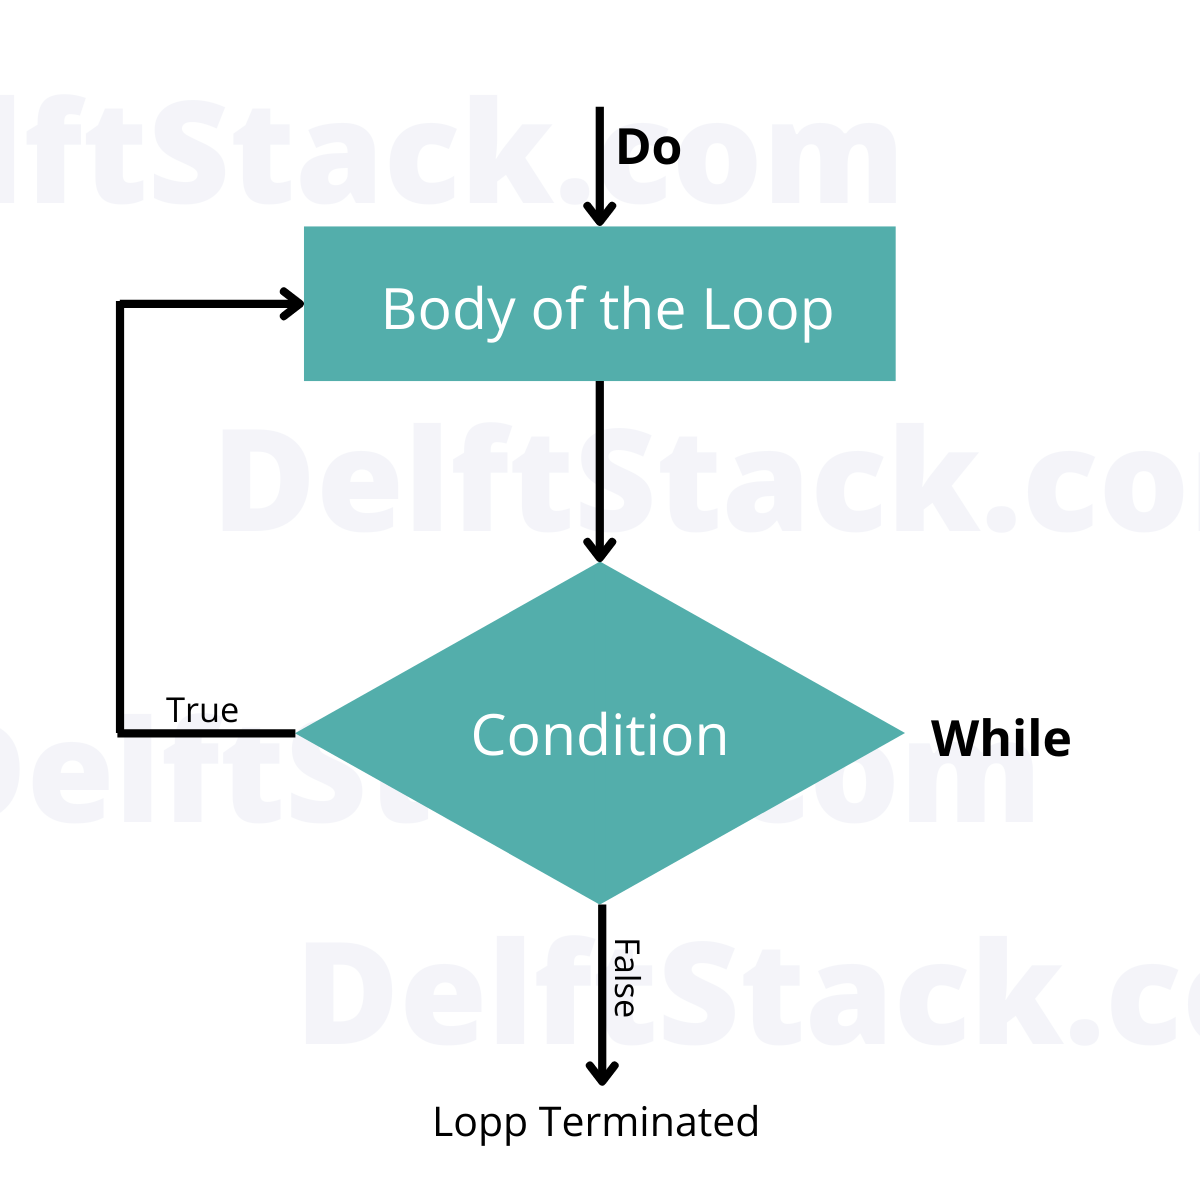 How does a Do-while loop work